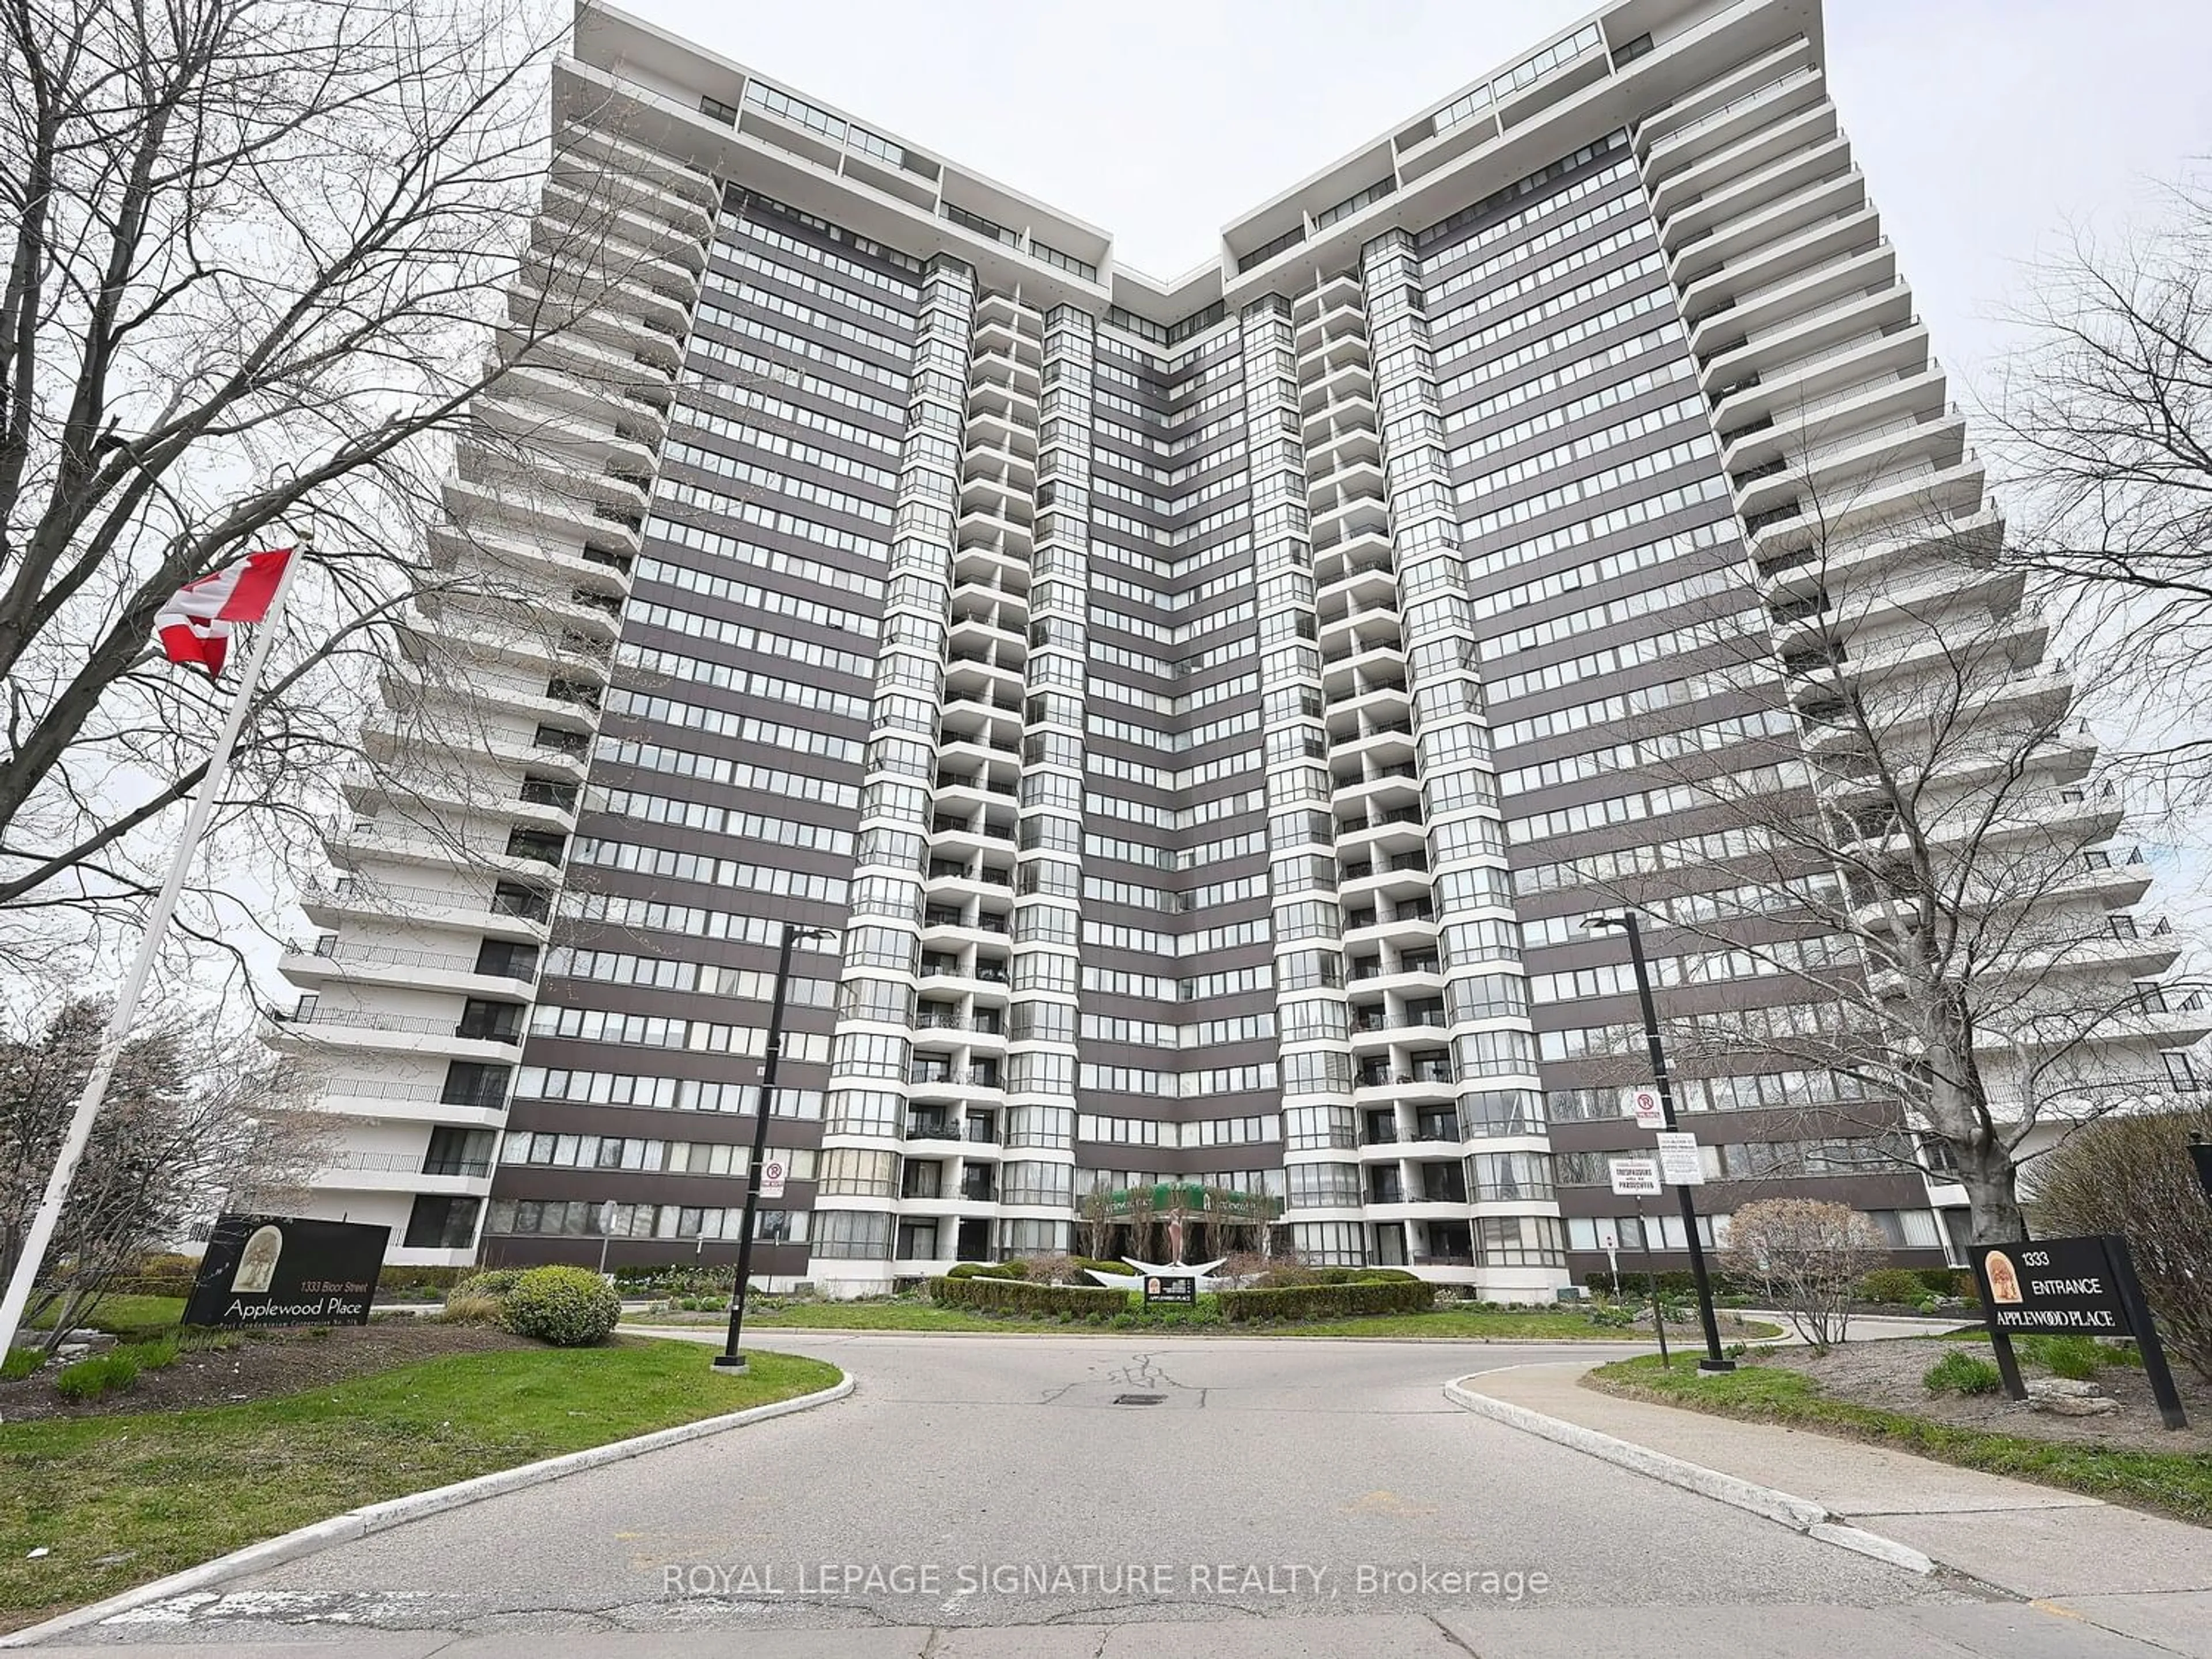 A pic from exterior of the house or condo for 1333 Bloor St #914, Mississauga Ontario L4Y 3T6